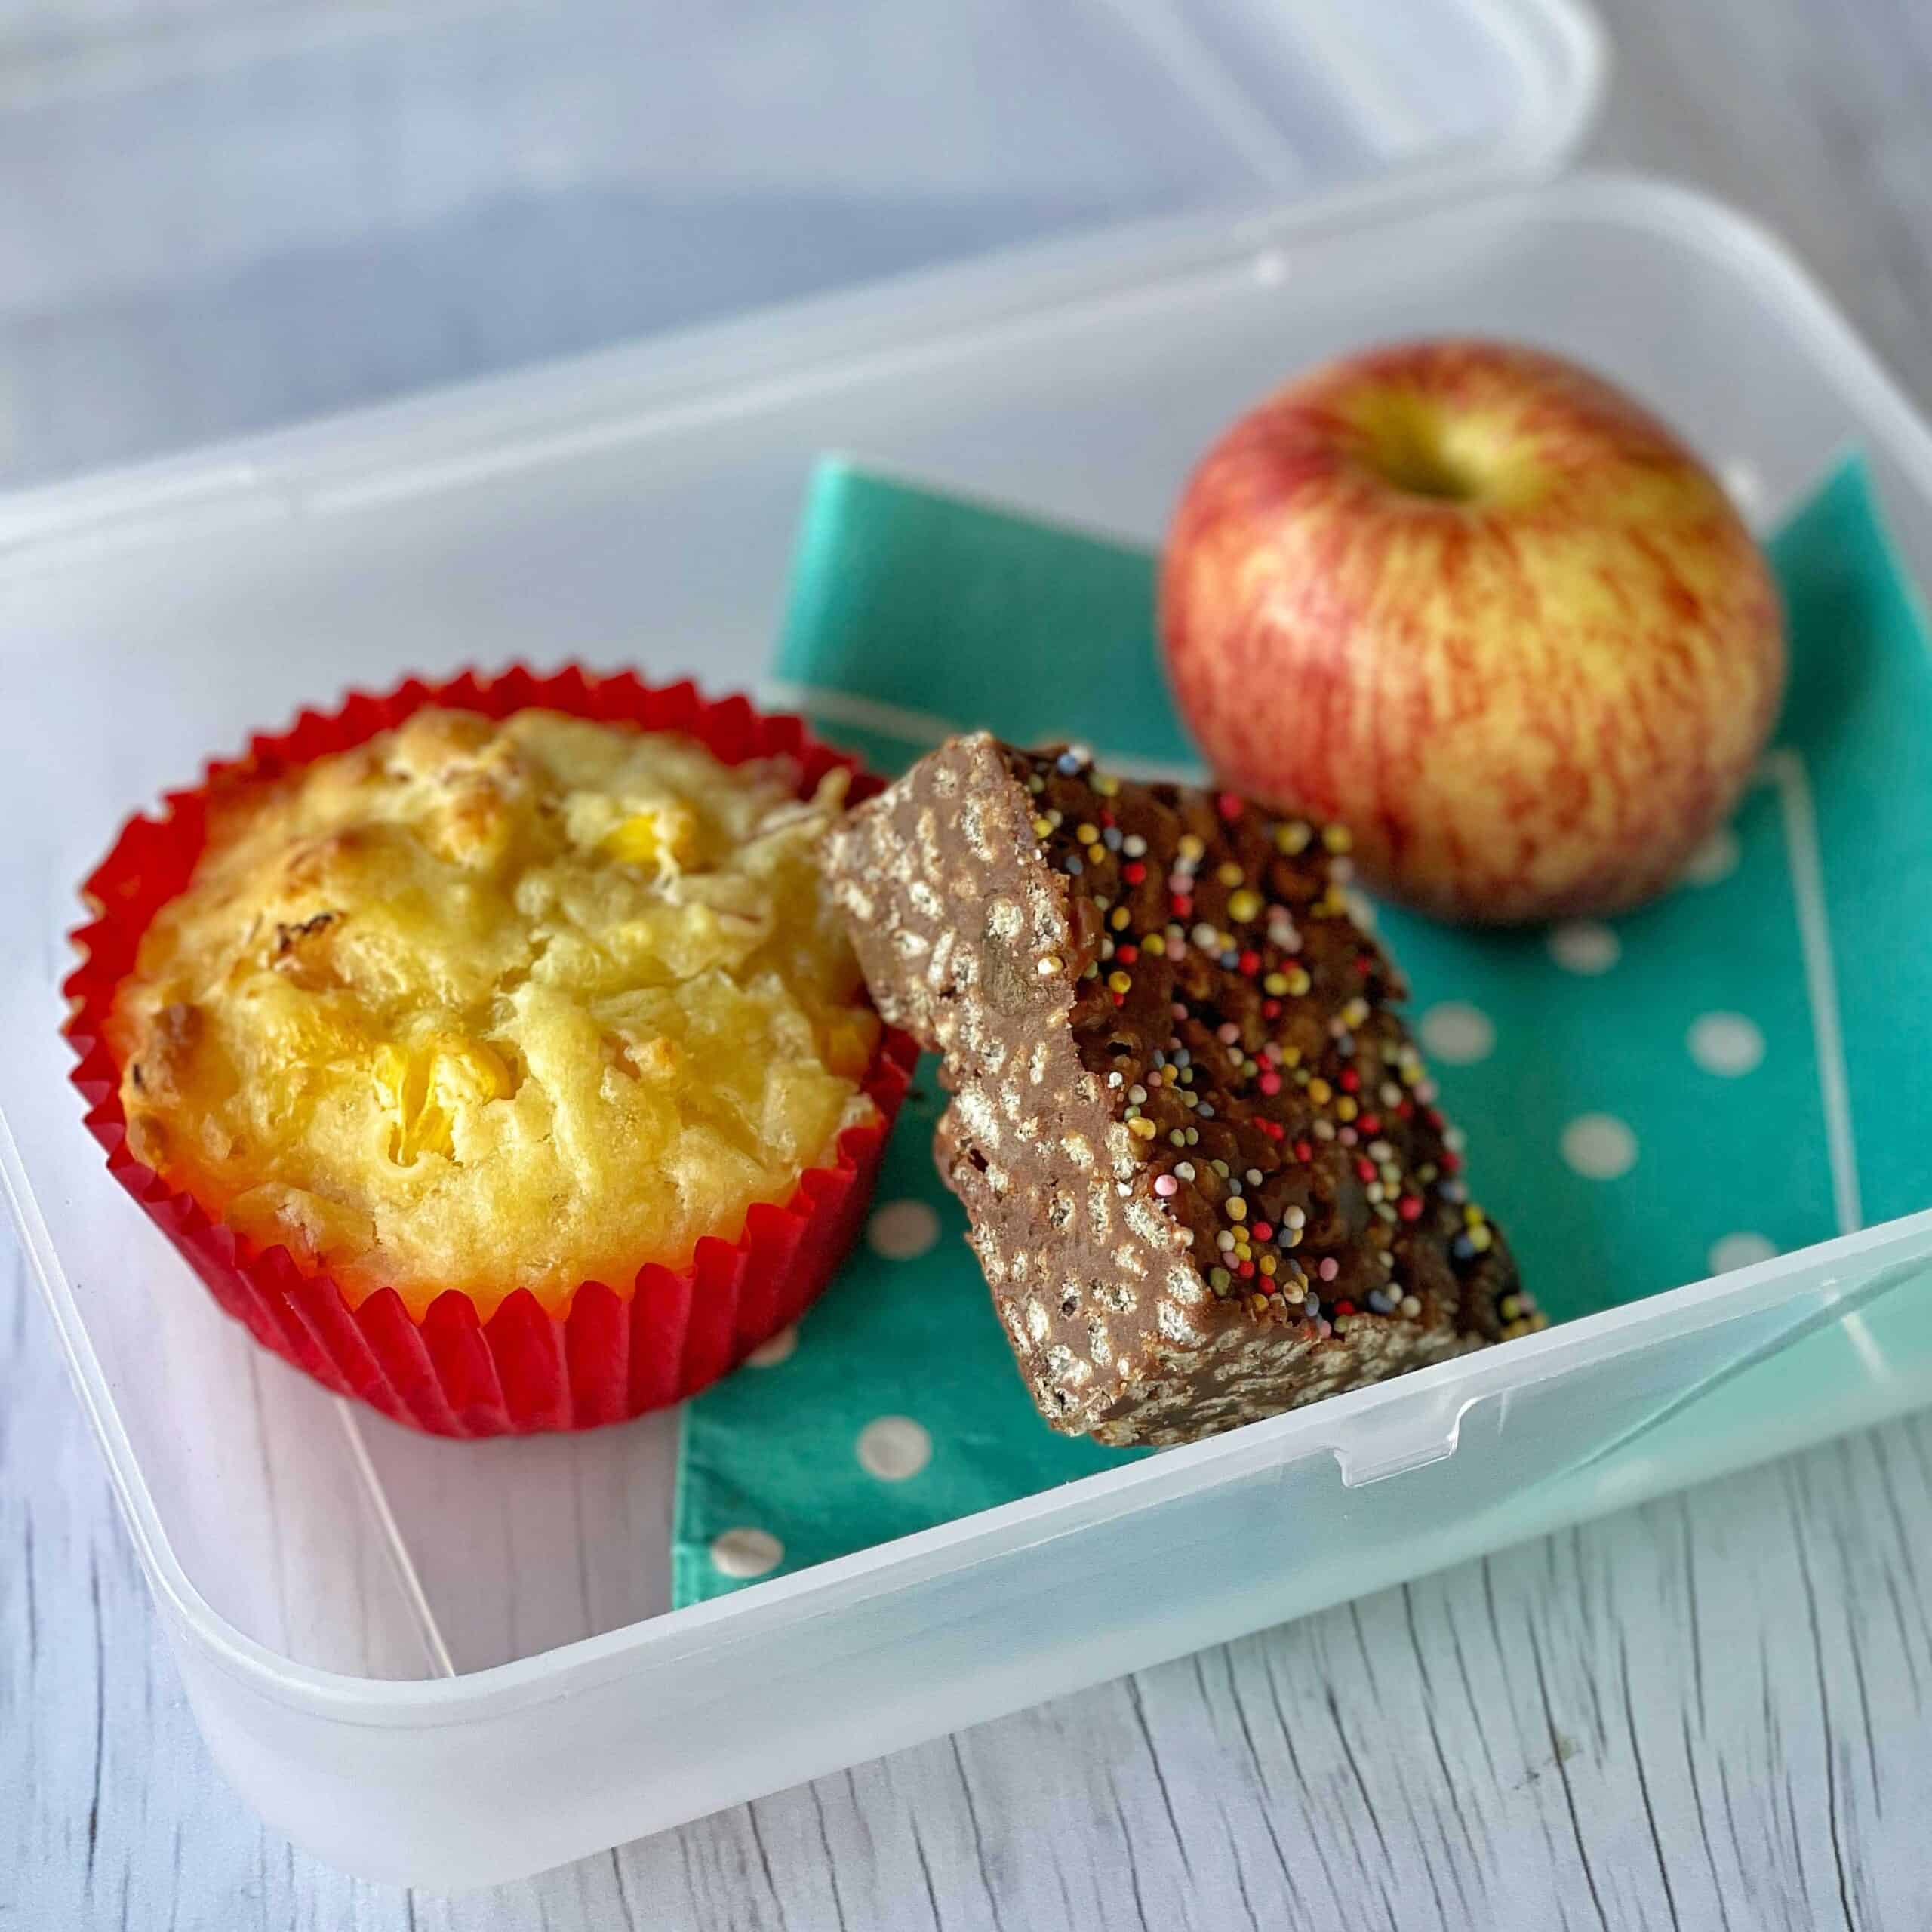 A savoury muffin, a piece of chocolate slice and an apple sitting in a plastic lunchbox.